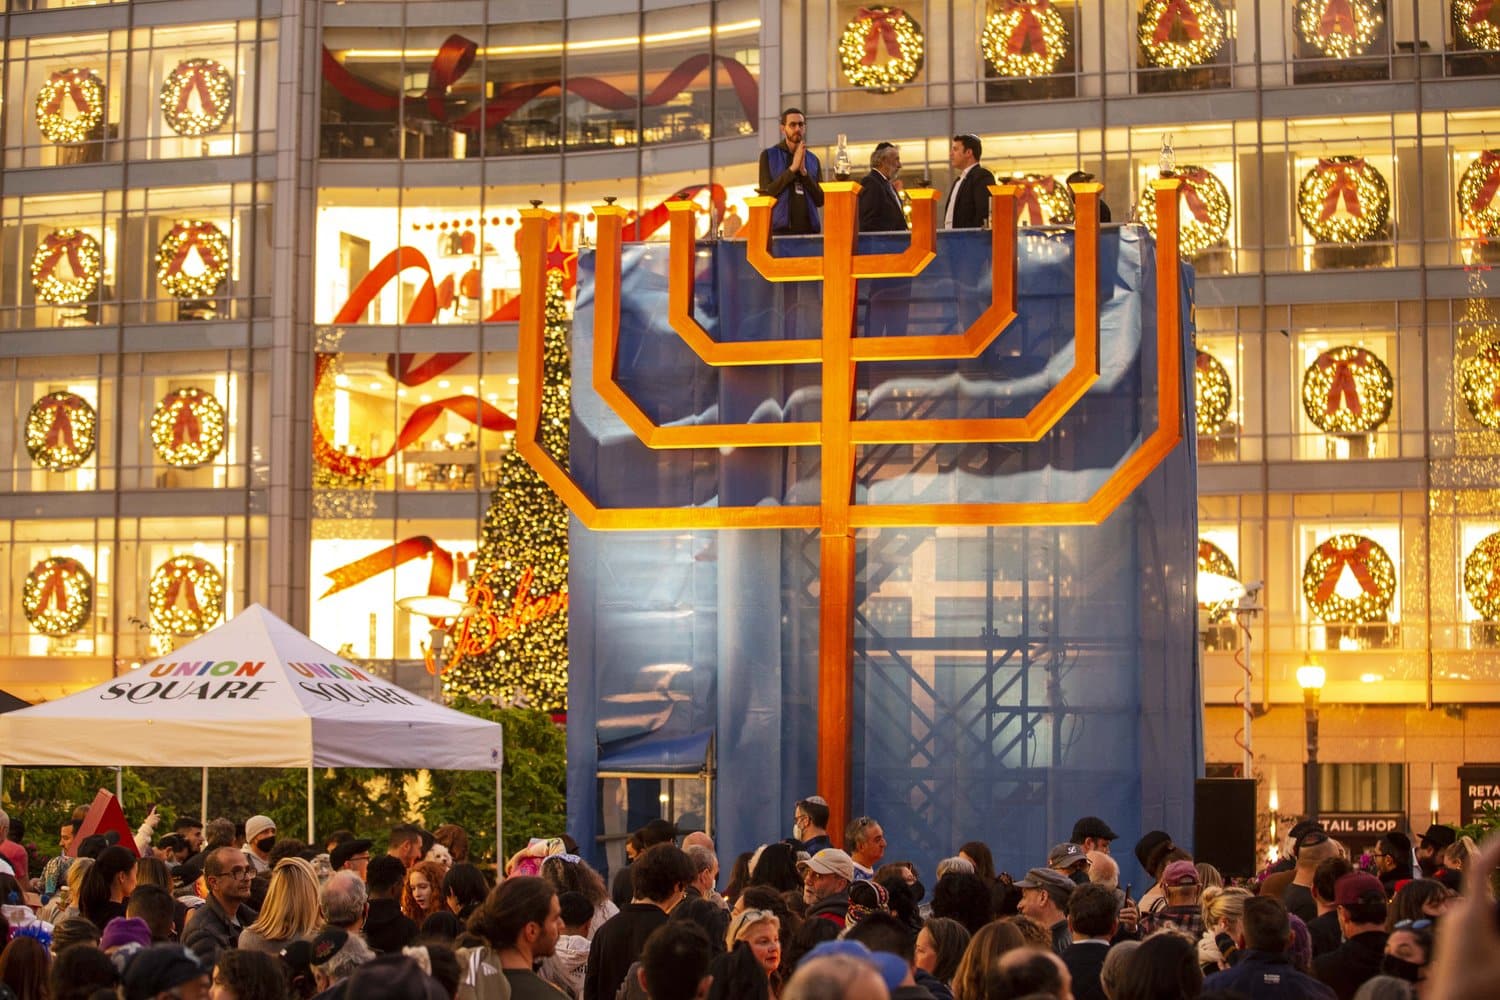 A 25-foot-tall wooden menorah amidst a crowd of people.